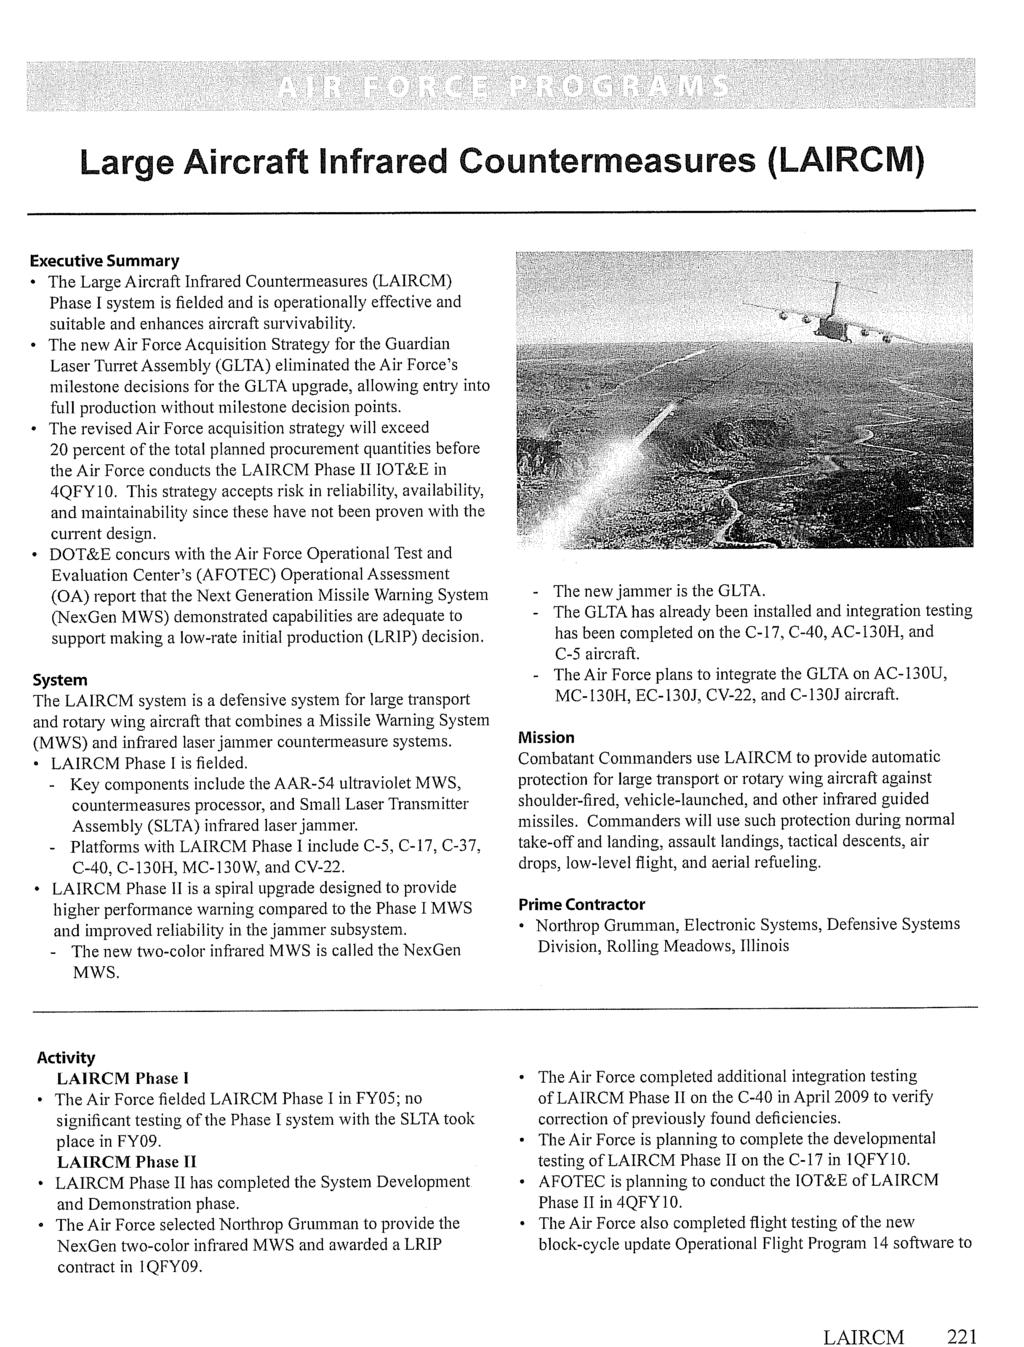 LAIRCM 221 Large Aircraft Infrared Countermeasures (LAIRCM) Executive Summary The Large Aircraft Infrared Countermeasures (LAIRCM) Phase I system is fielded and is operationally effective and